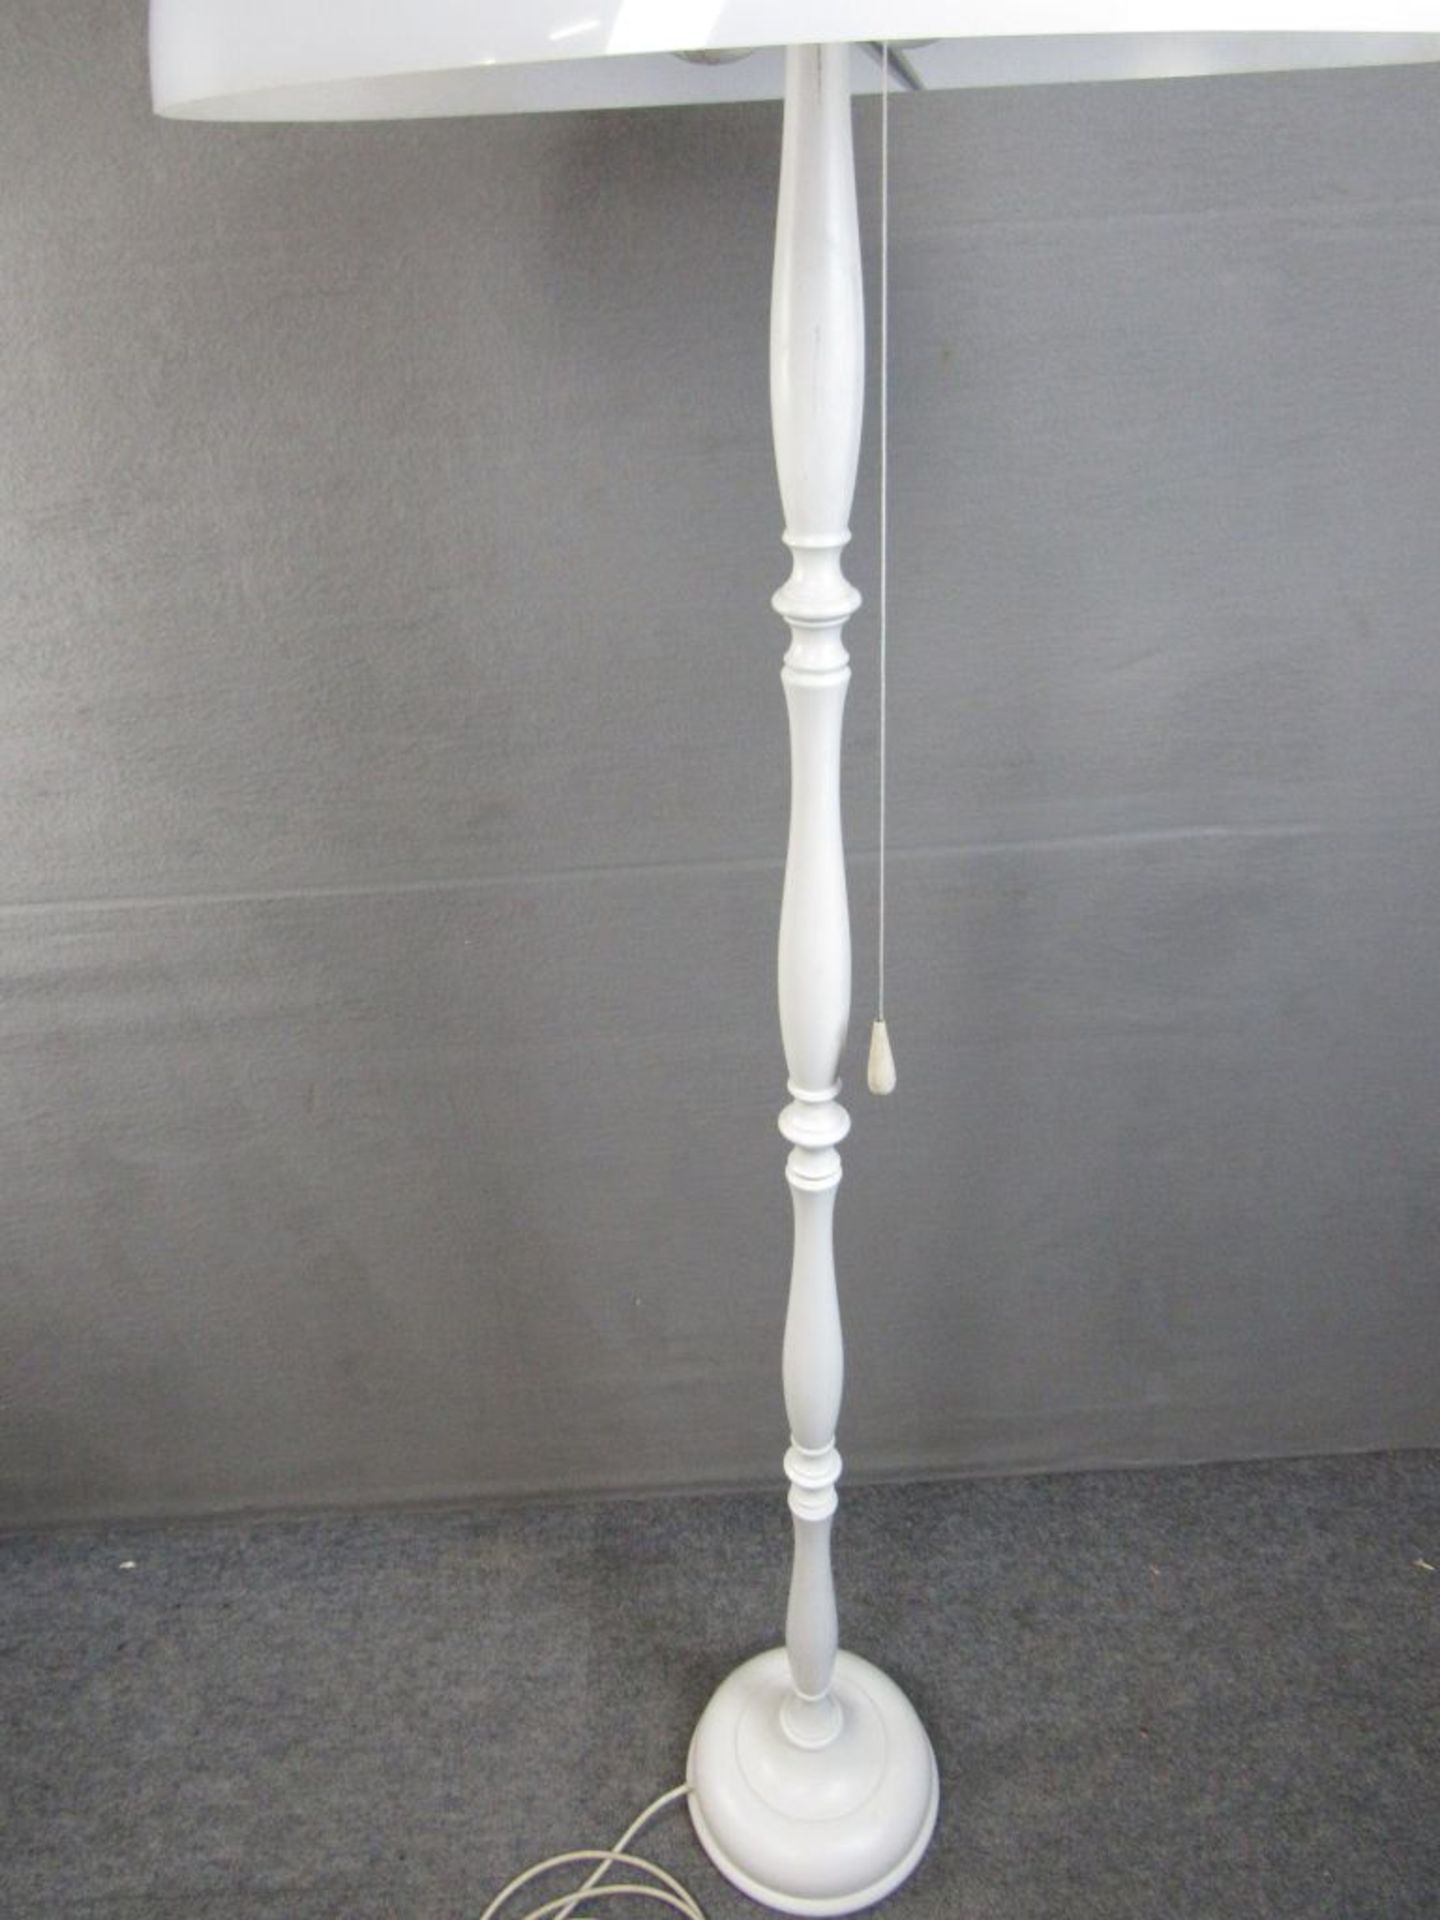 Stehlampe weiss 158cm hoch - Image 6 of 6